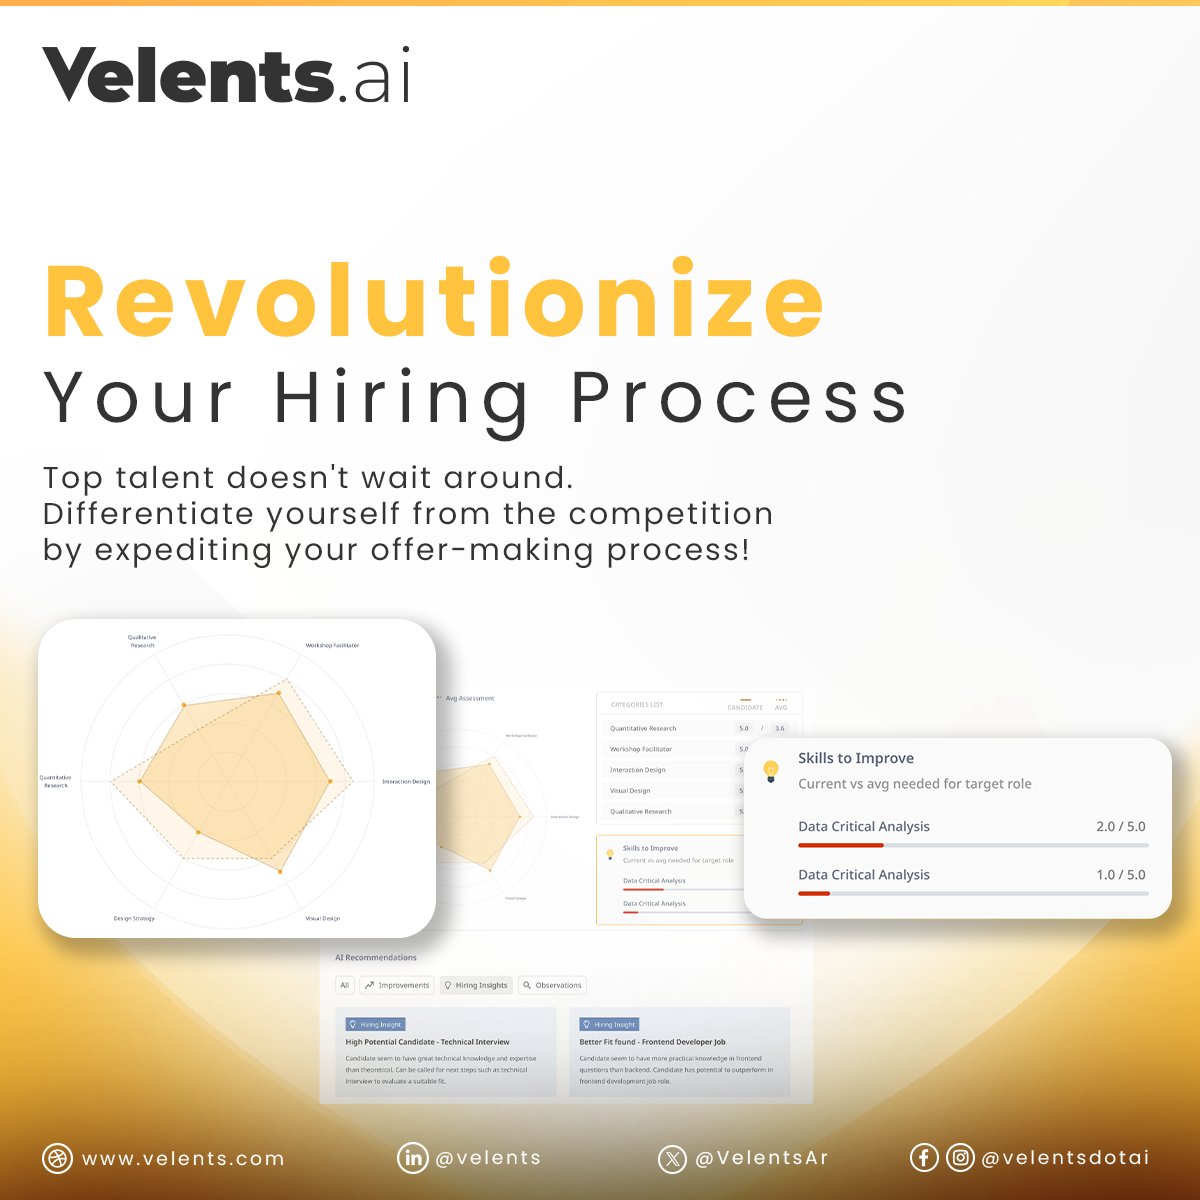 Top talent doesn't wait around.
Differentiate yourself from the competition by speeding up your hiring process with Velents AI hiring tools and hire the perfect candidate!

Sign up now for Free!
🔗 bit.ly/3rLFlqo

#AIinHiring #HR #AI #Recruitment